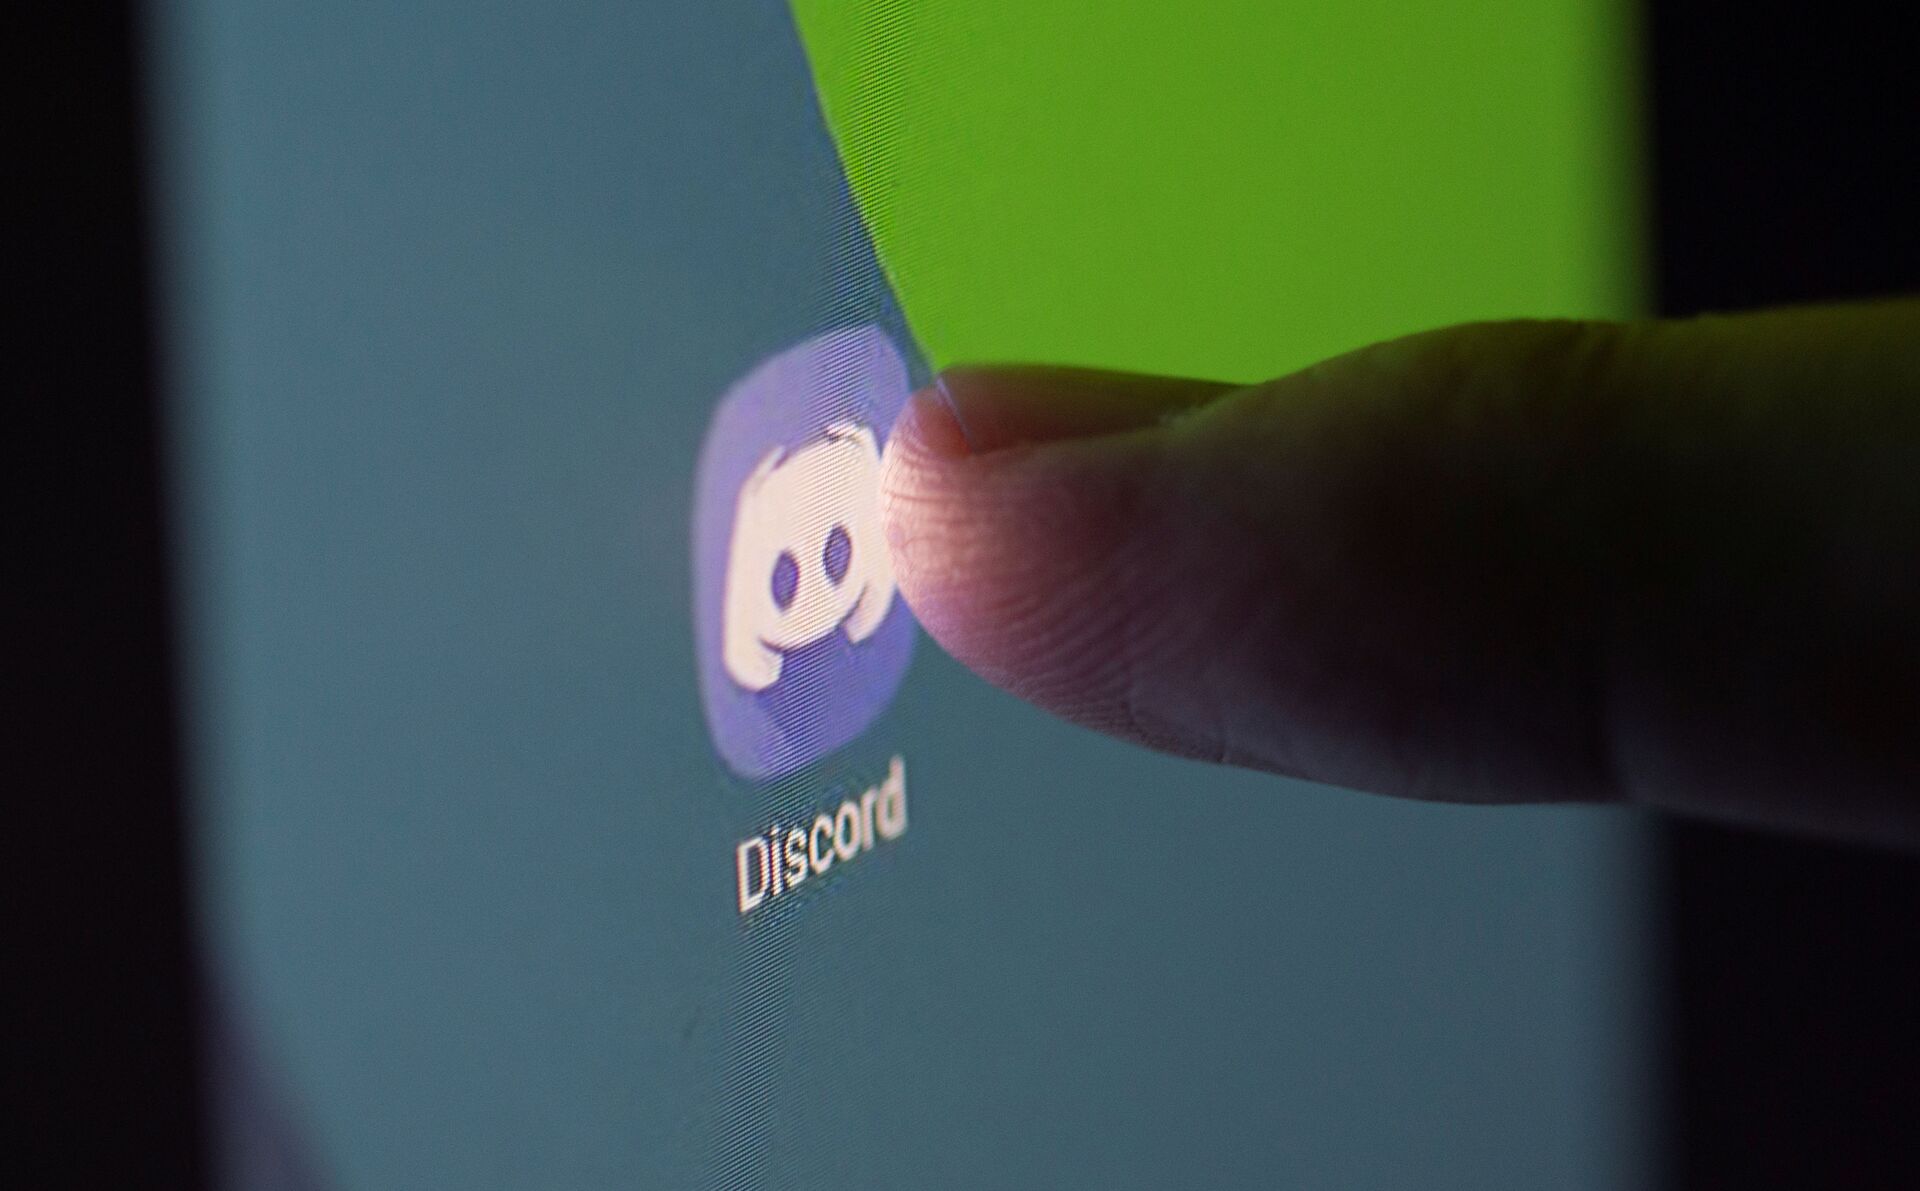 Discord Reportedly Ends Multimillion-Dollar Deal With Microsoft as Platform Eyes Potential IPO - Sputnik International, 1920, 21.04.2021